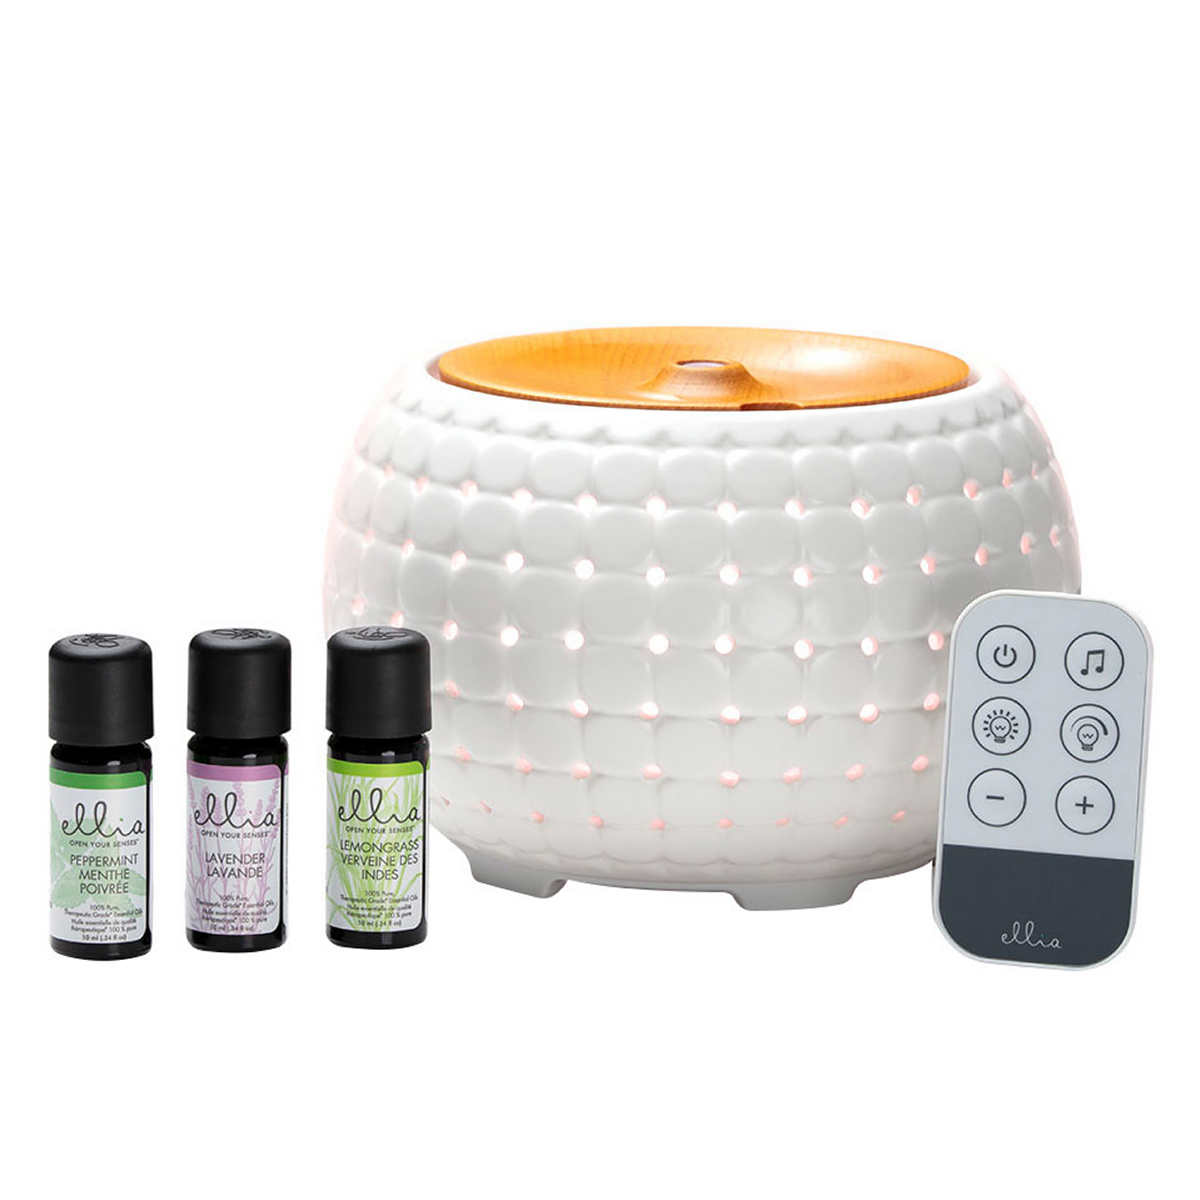 Ellia Garther Ultrasonic Aroma Diffuser, Humidifier with – Color Changing Light & Mood Sound